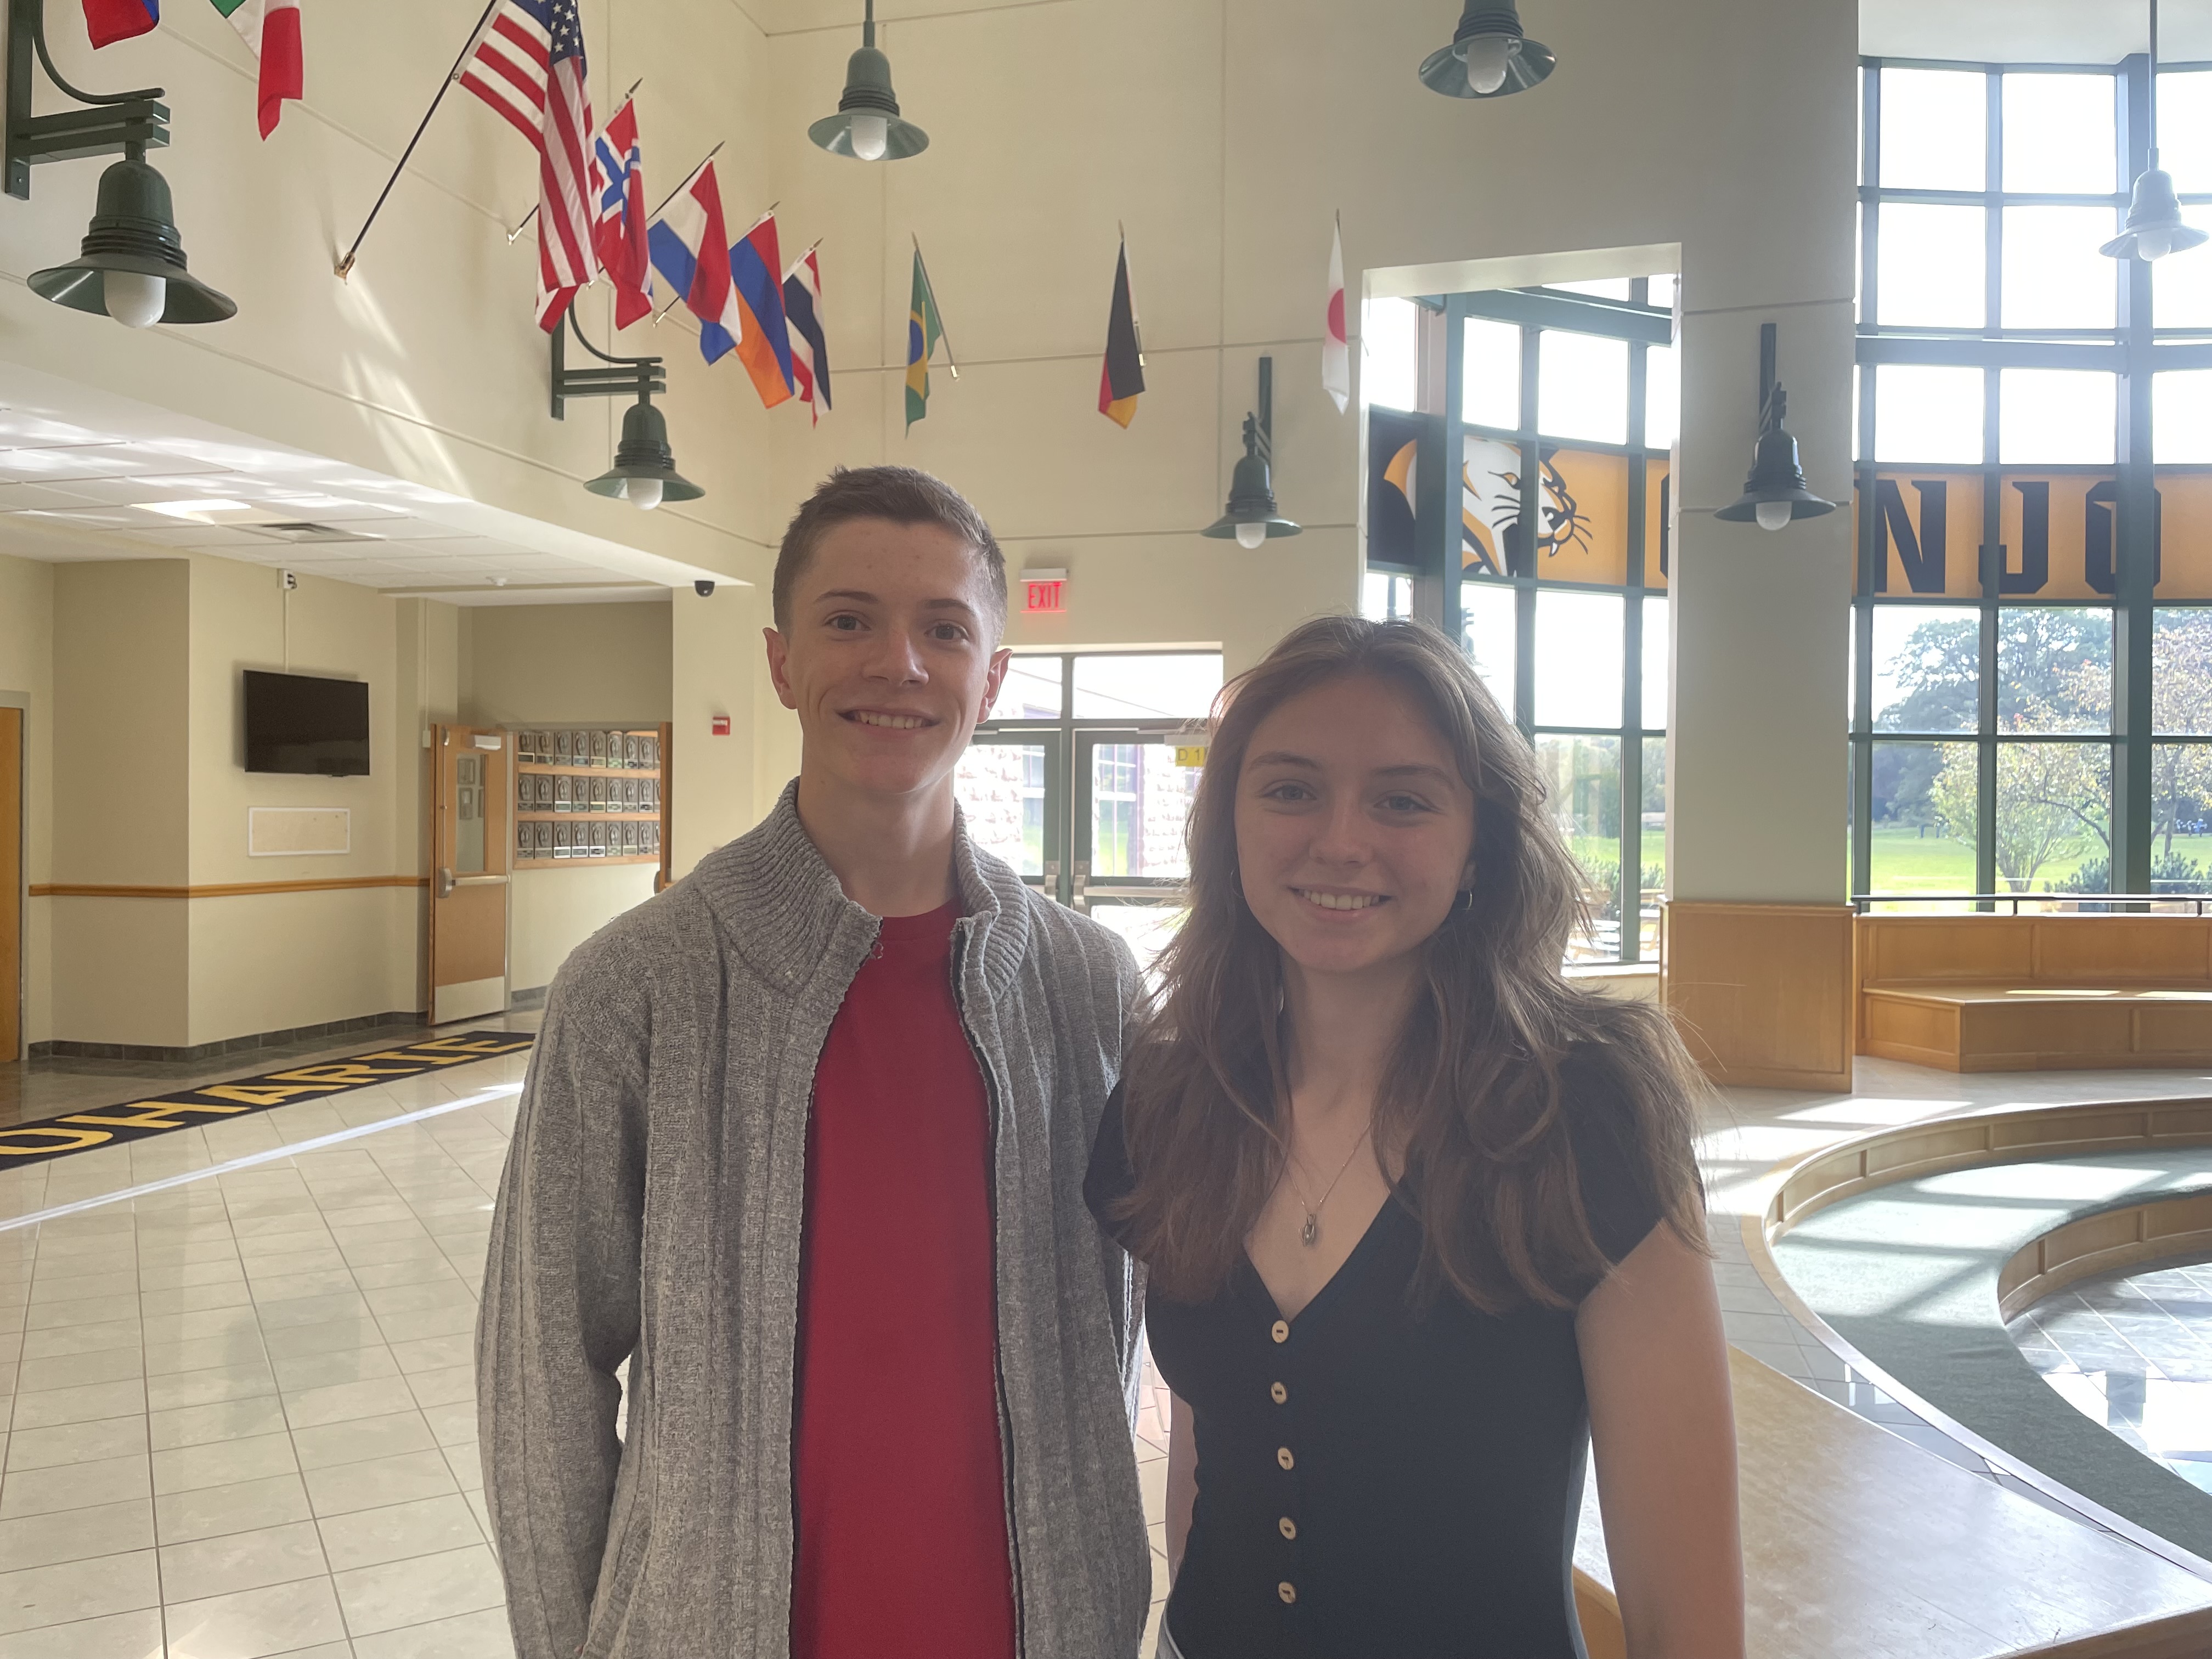 Two students stand in the lobby of the high school.